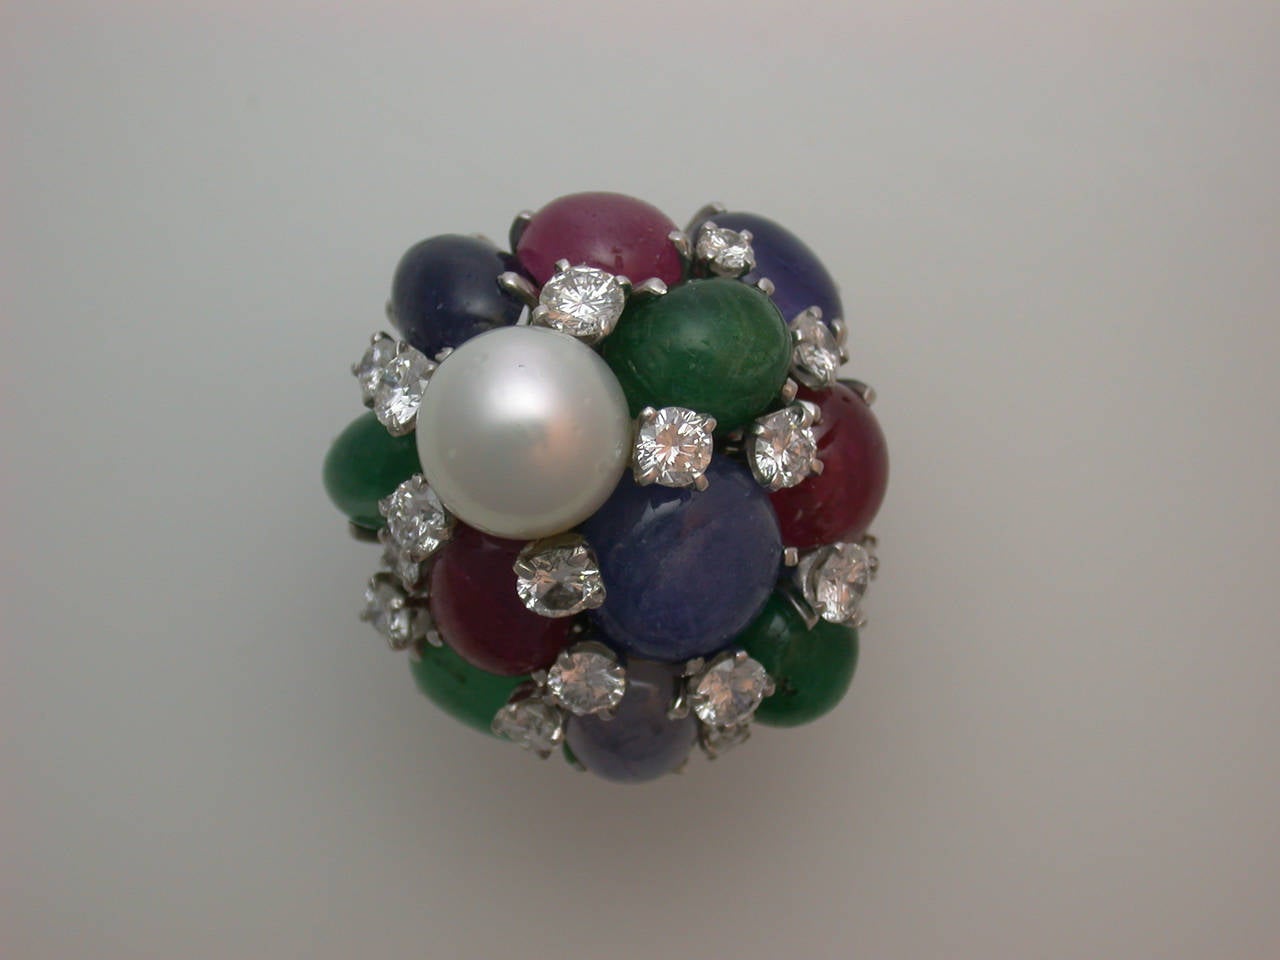 The very large, domed ring designed like a giant bubble of cabochon rubies, sapphires and emeralds (3 rubies weighing approximately 8 carats total, 4 emeralds weighing approximately 9 carats total, 4 sapphires weighing approximately 12 carats total)